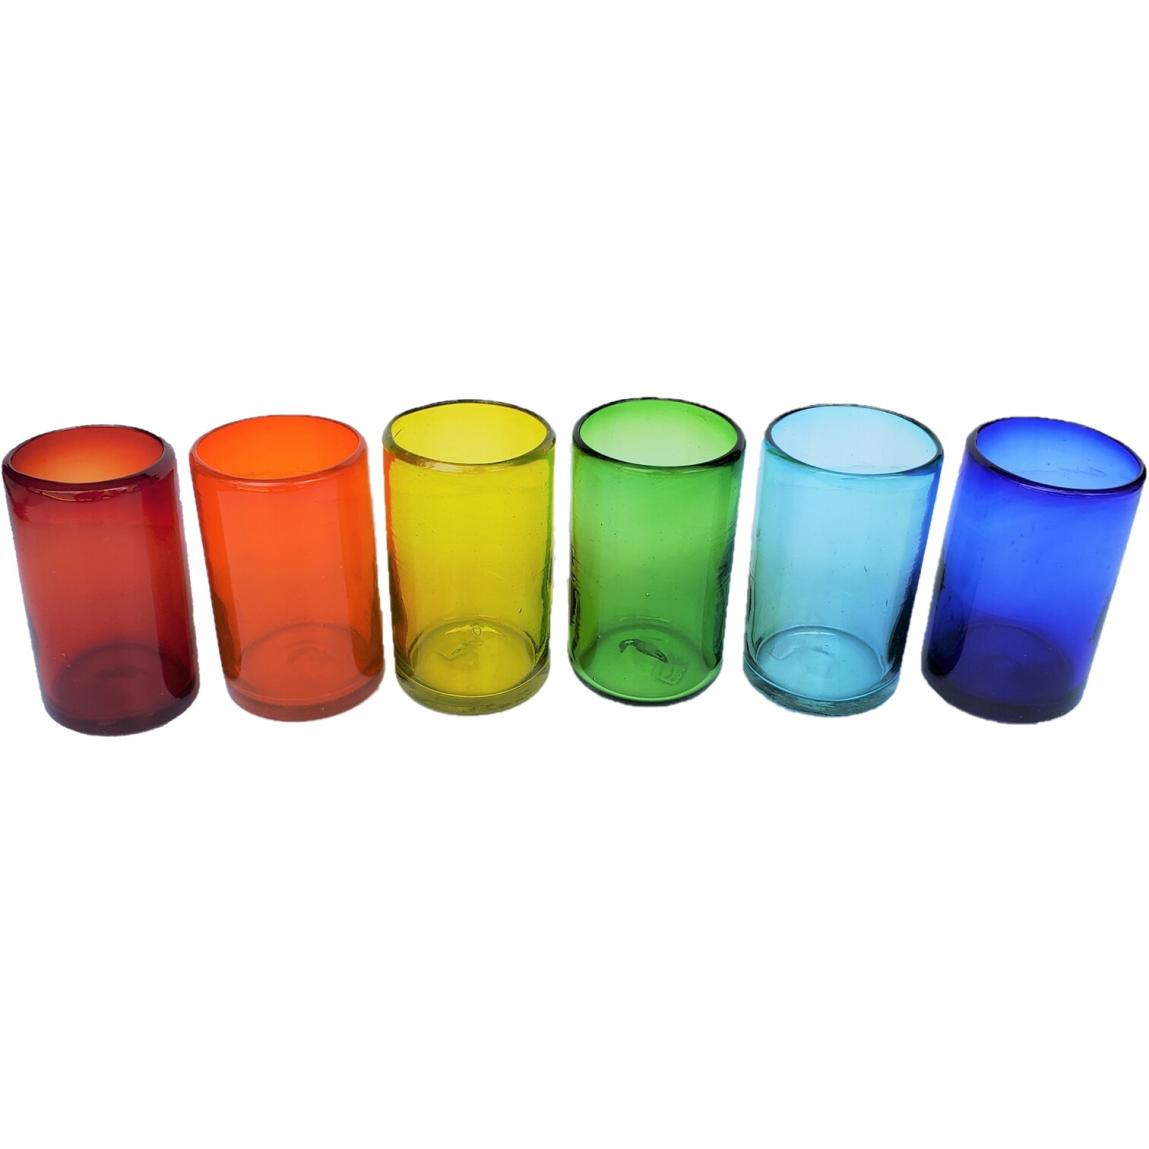 Sale Items / Rainbow Colored 14 oz Drinking Glasses (set of 6) / These handcrafted glasses deliver a classic touch to your favorite drink.